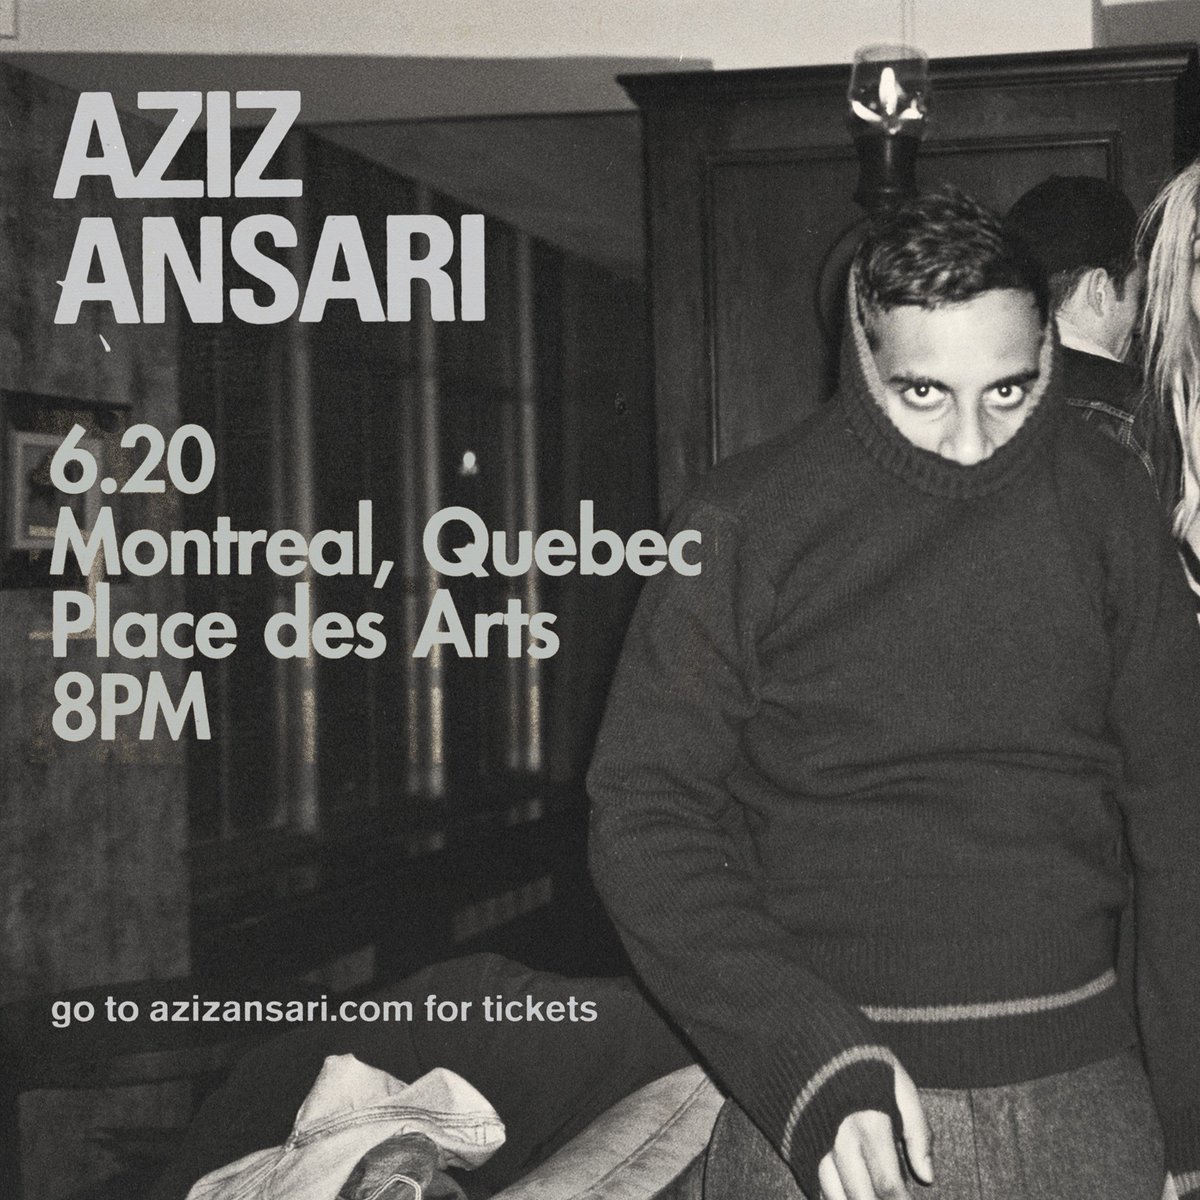 MONTREAL: I’m playing Place Des Arts on June 20th. Get tix at  